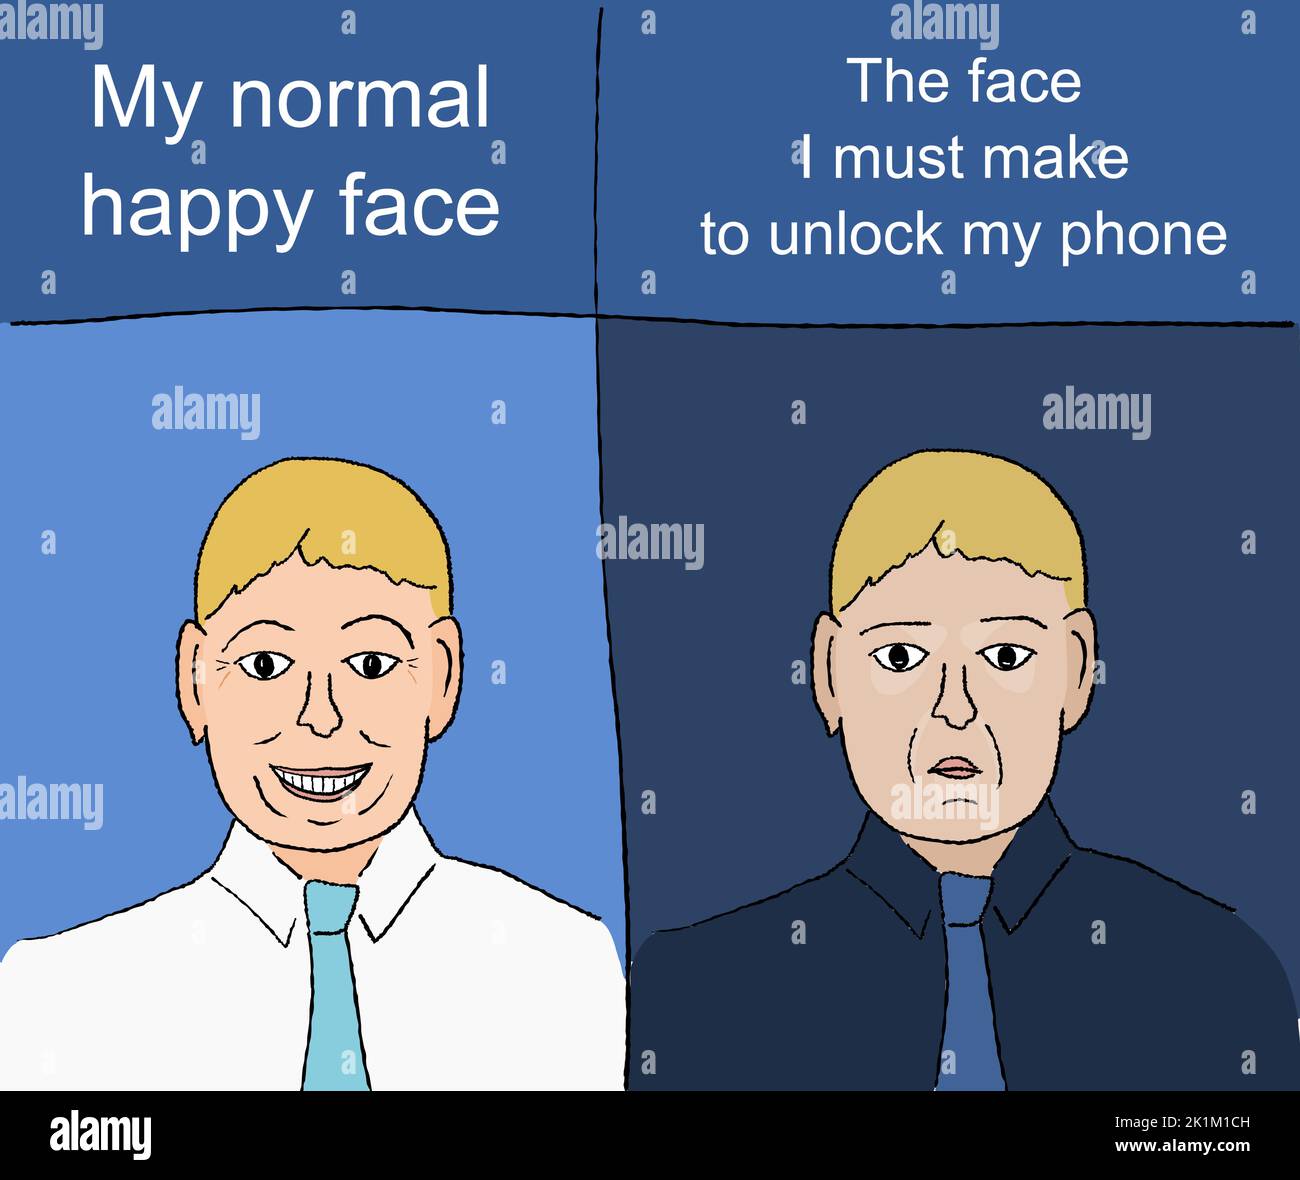 Unlocking phone by face expression. Funny meme for social media sharing. Stock Vector